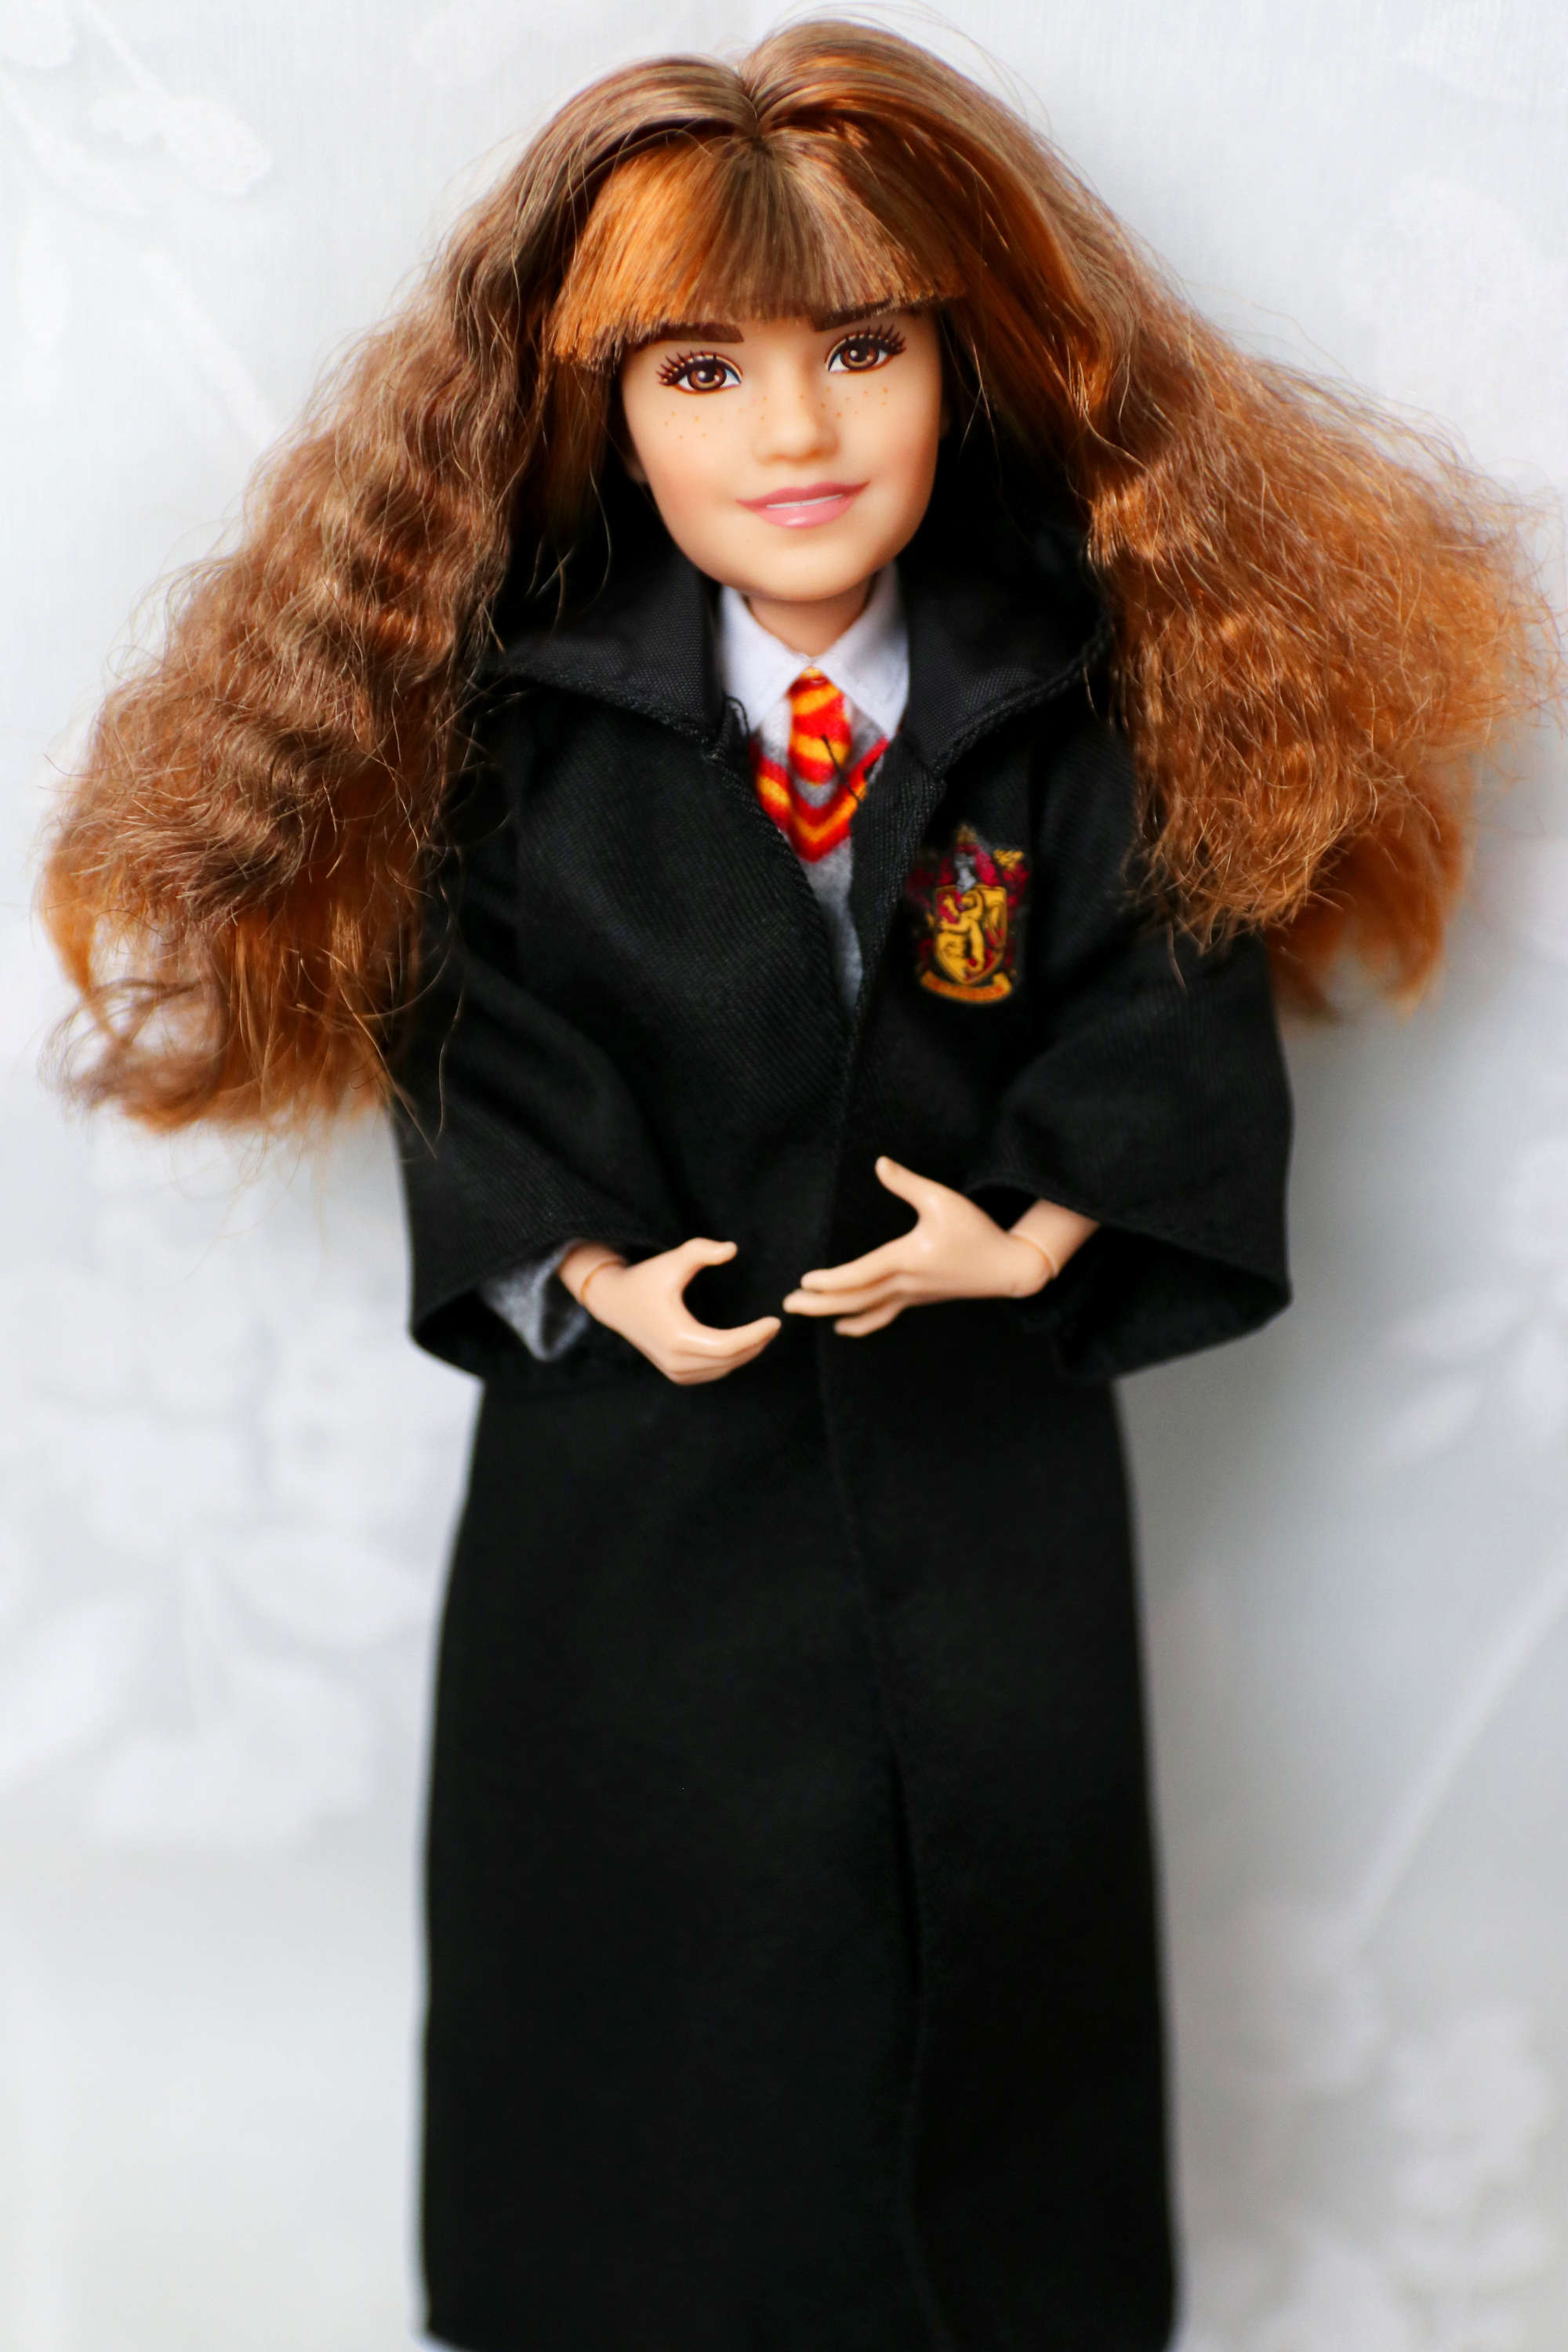 Mattel Harry Potter Doll - Barbie-Sized Harry Potter Collection - New In  Box